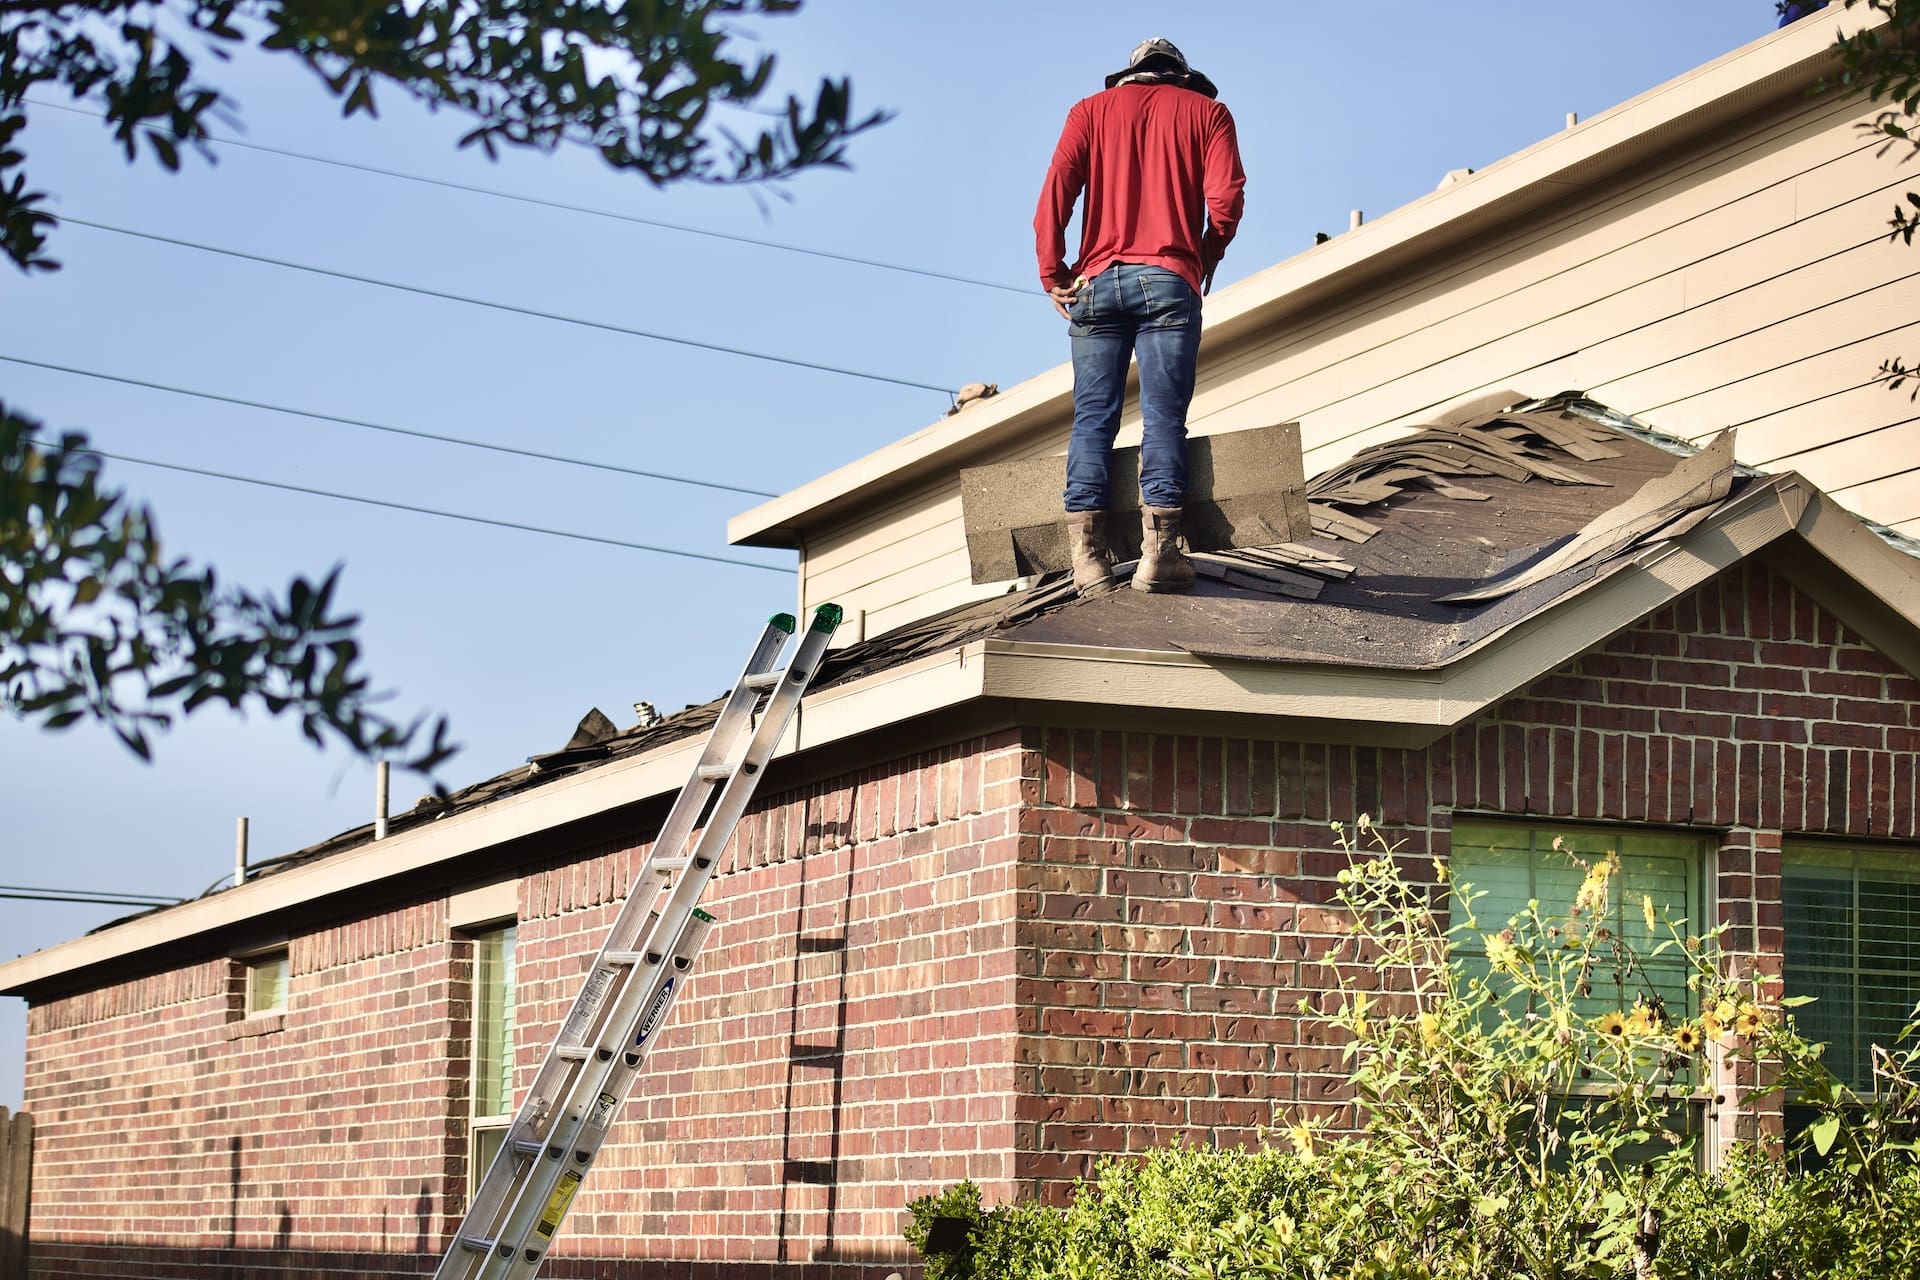 After the Storm: How to Assess and Repair Roof Damage